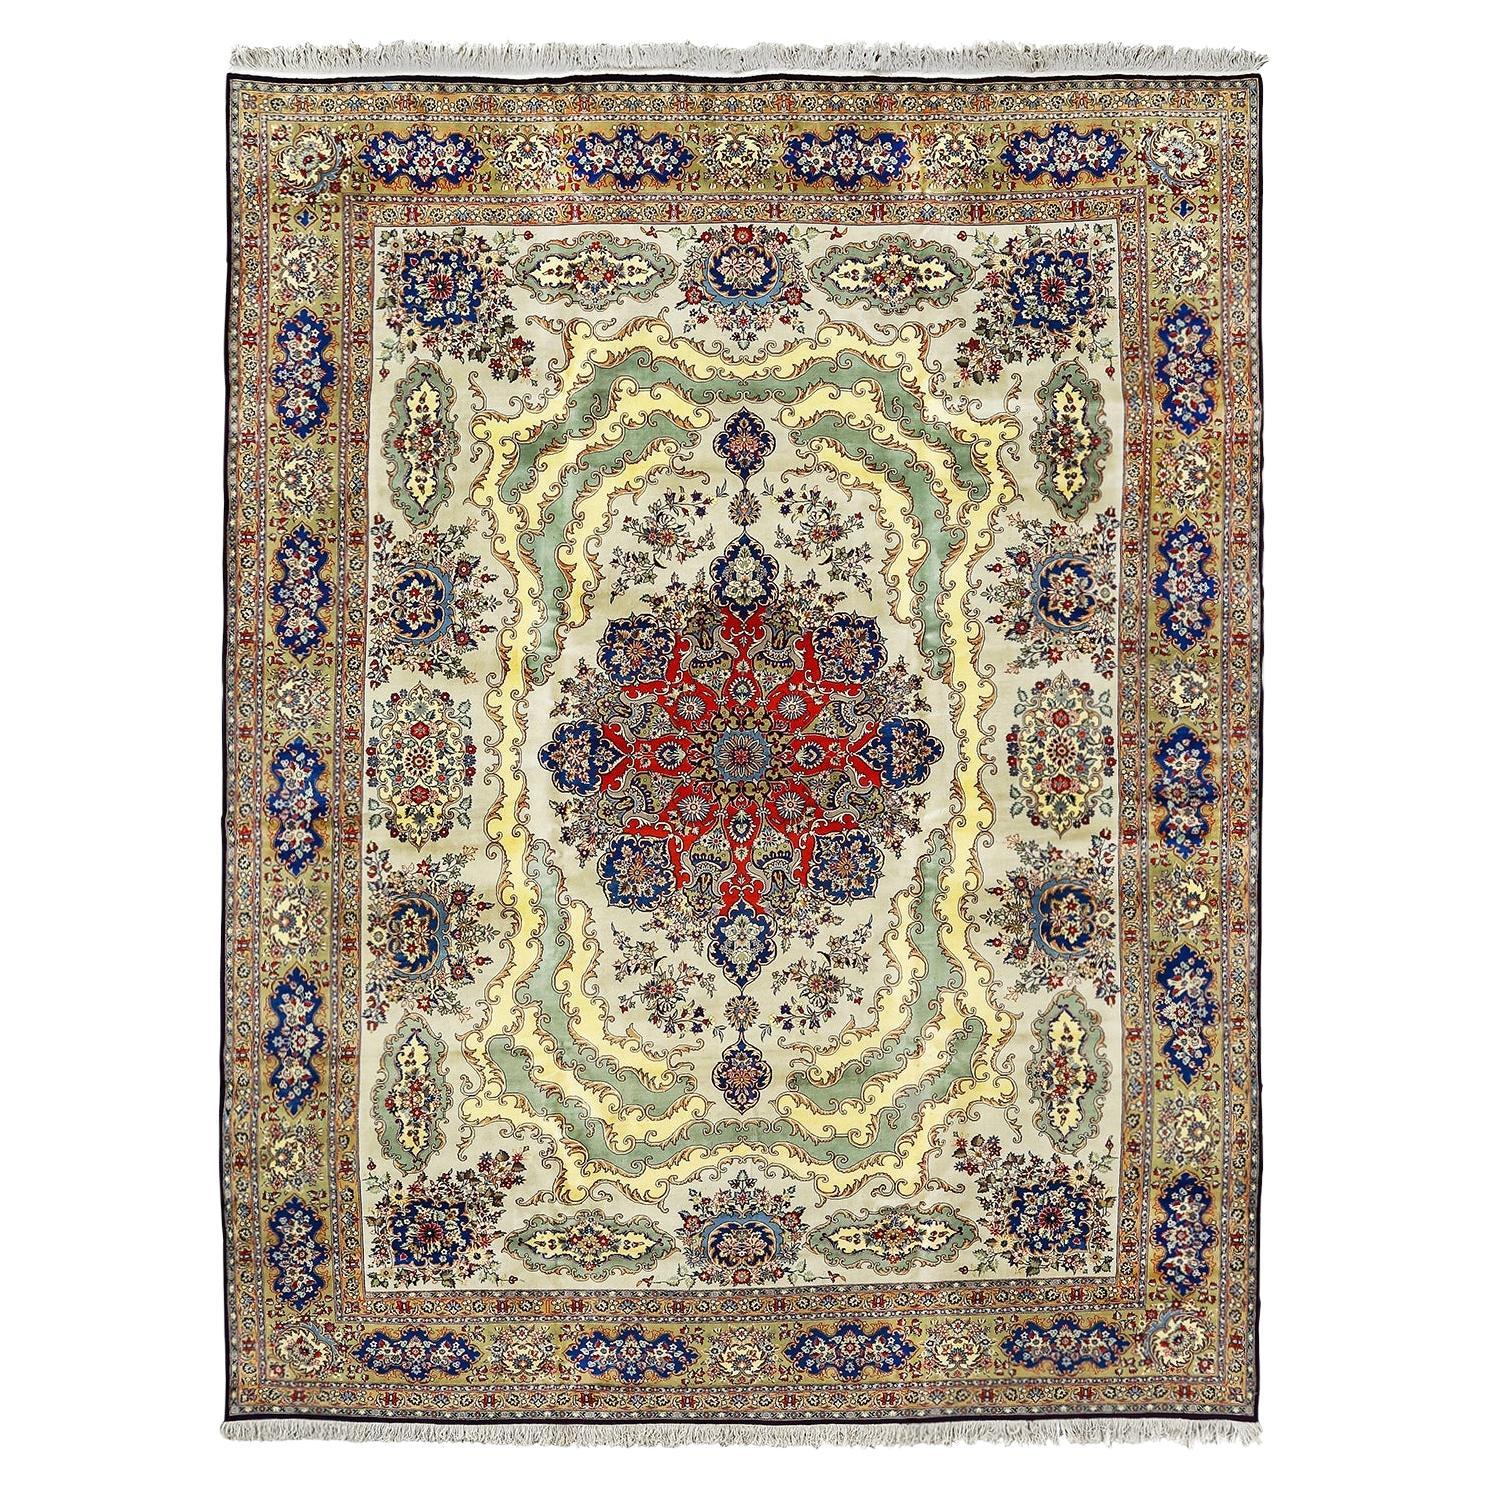 Damoka Collection Vintage Qom Arsalani - Size: 14 ft 0 in x 10 ft 7 in For Sale